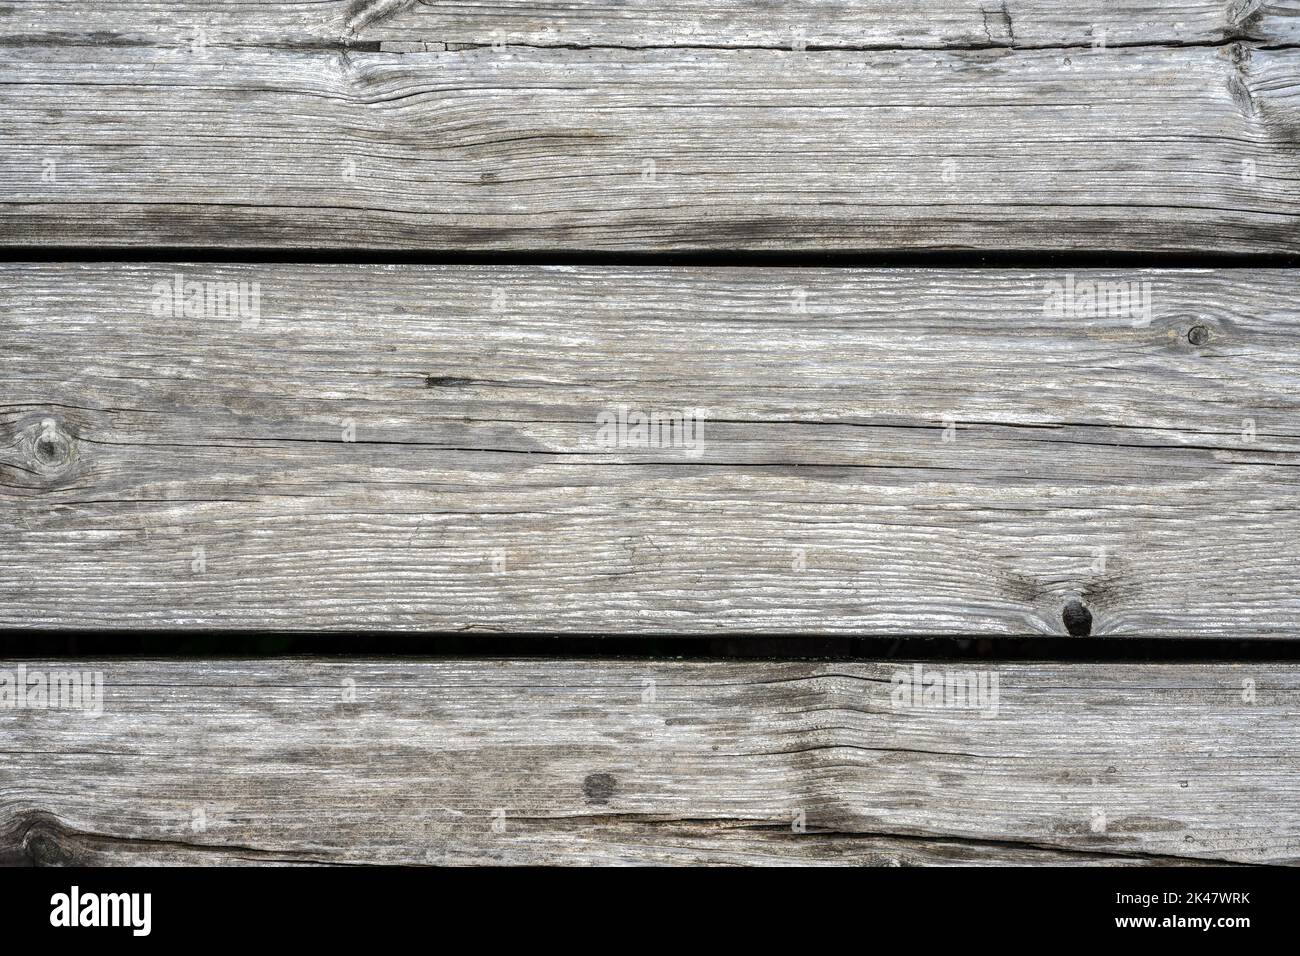 Wood barn planks background, old rustic wooden wall close-up. Weathered rough timber with cracks, grain and knots, gray vintage dry boards for wallpap Stock Photo